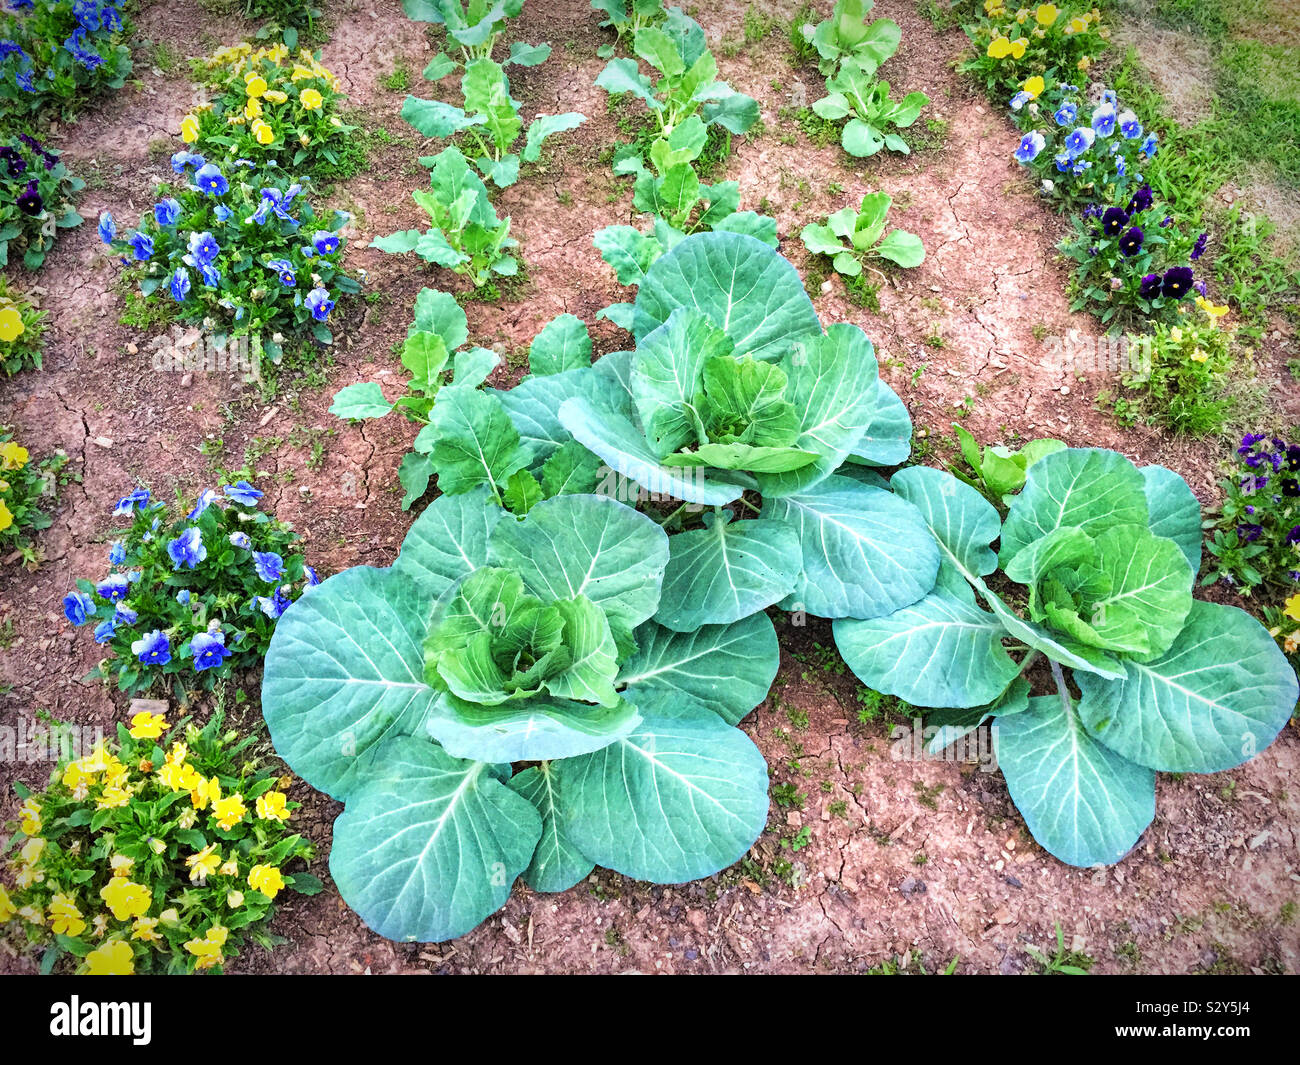 Agricultural field in its natural condition with vegetables such as this cabbage growing in it. Surrounding pansy flowers add color to an all green garden. Stock Photo